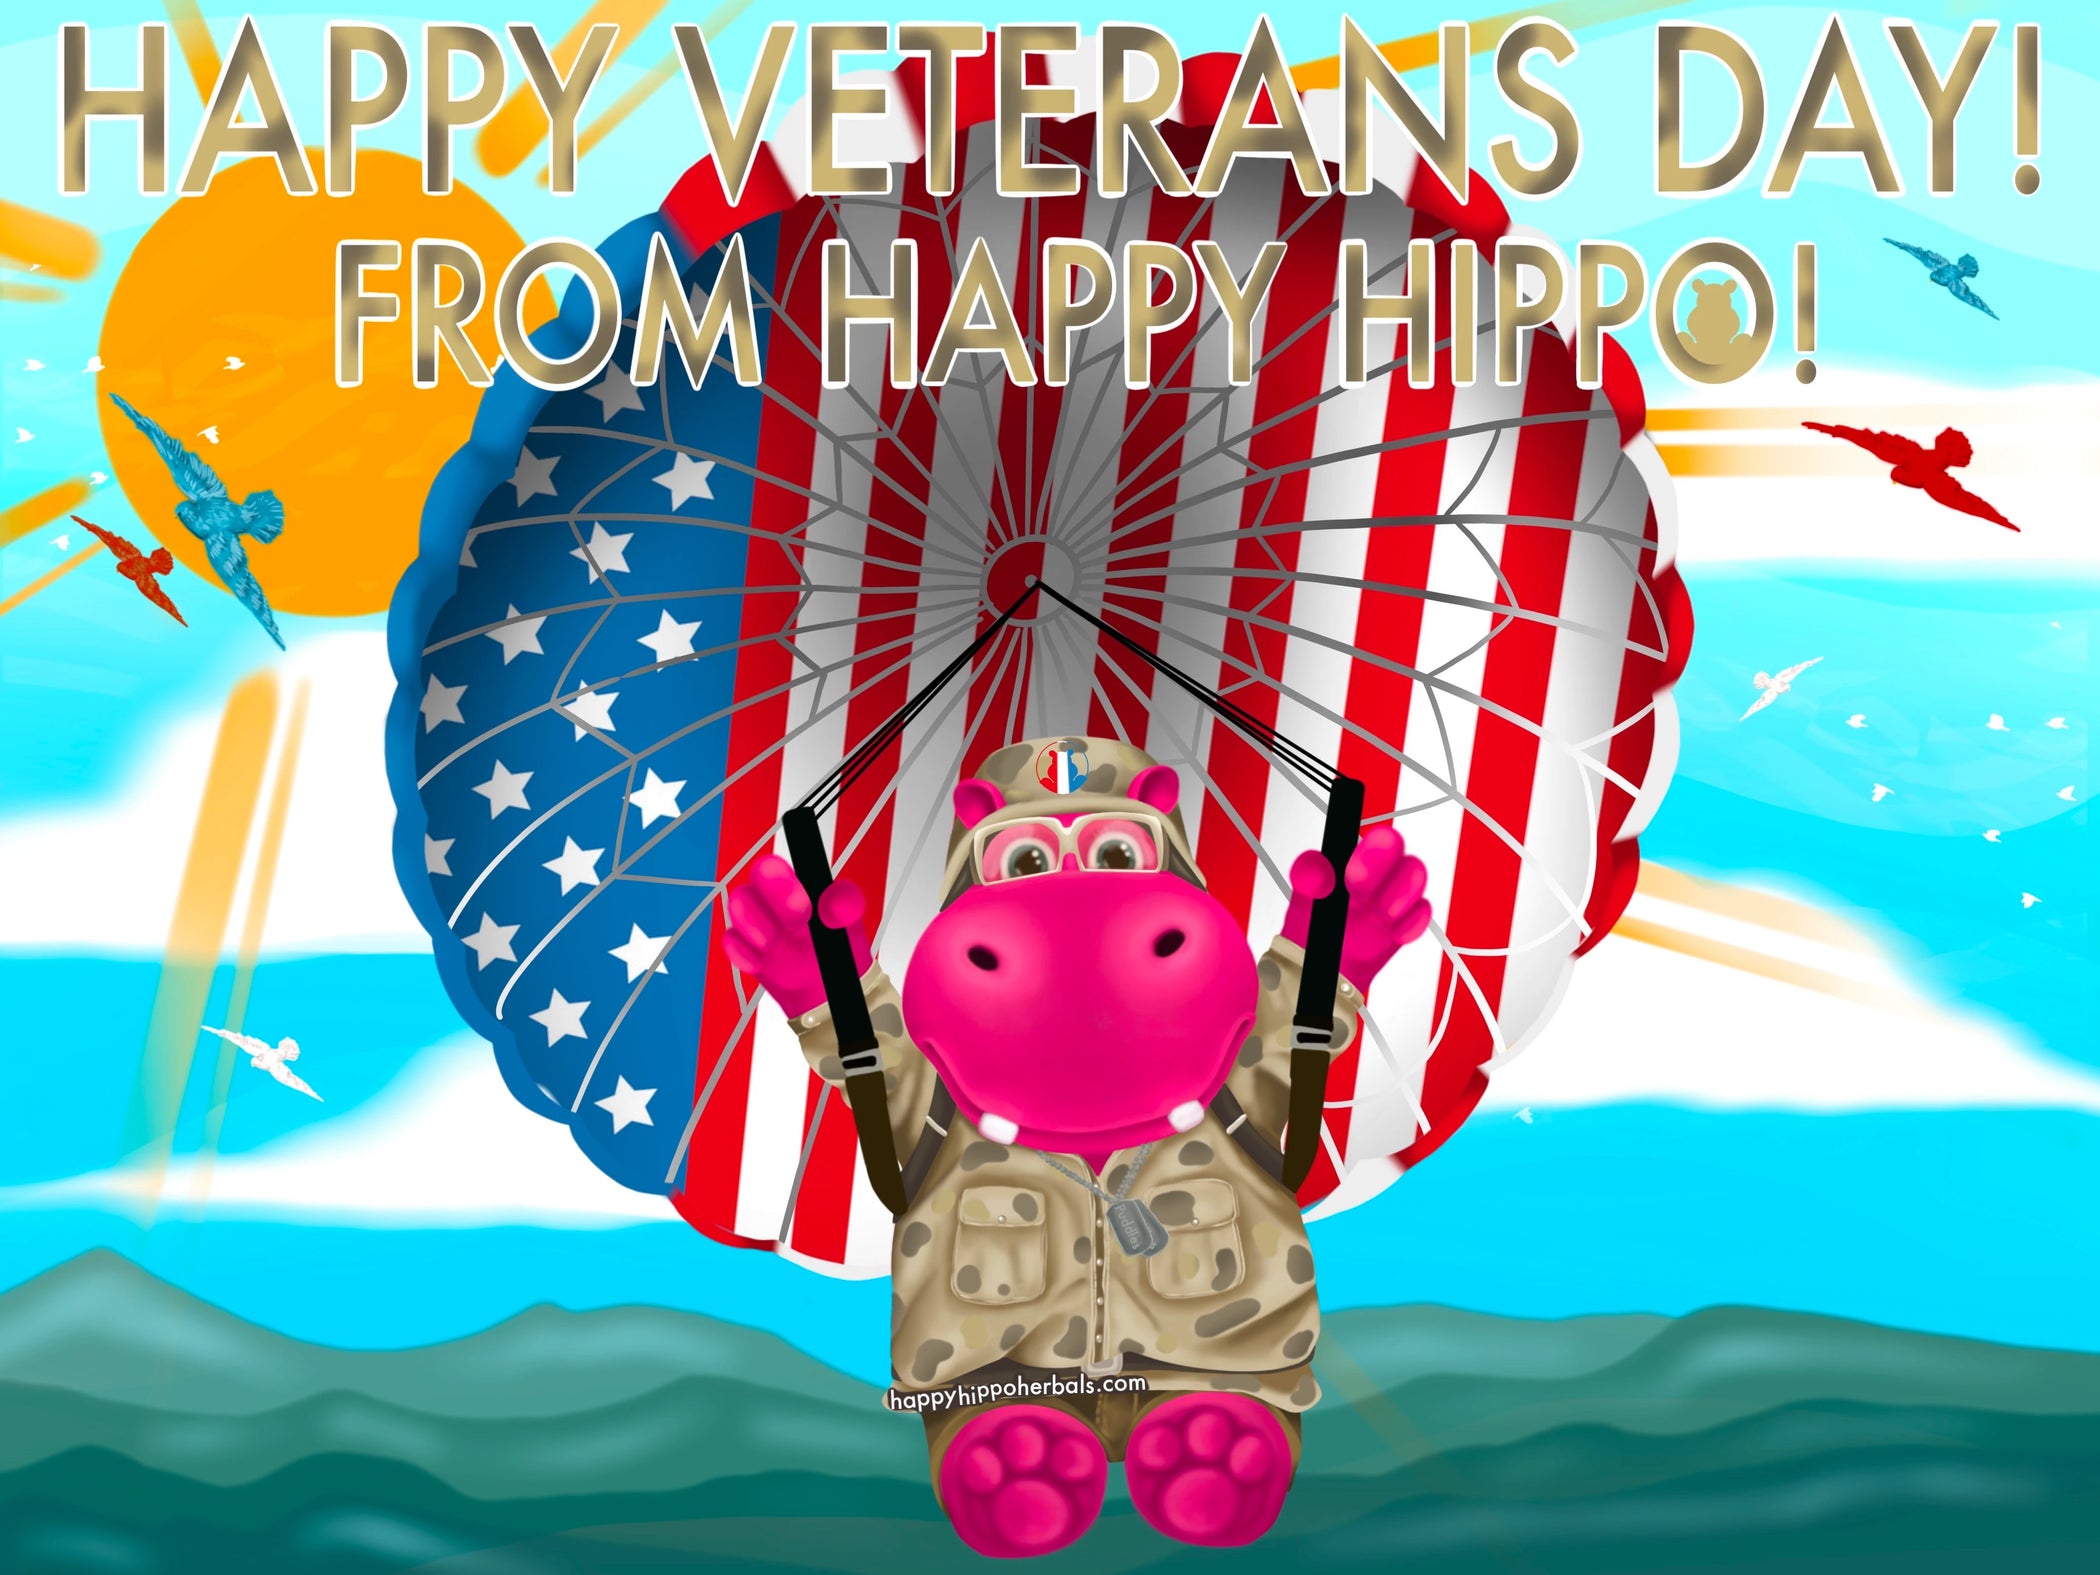 Graphic Designed image depicting Puddles the Hippo wearing camoflauge fatigues while para-trooping into hostile territory with a red, white, and blue parachute. The image represents Happy Hippo's celebration of Veterans Day